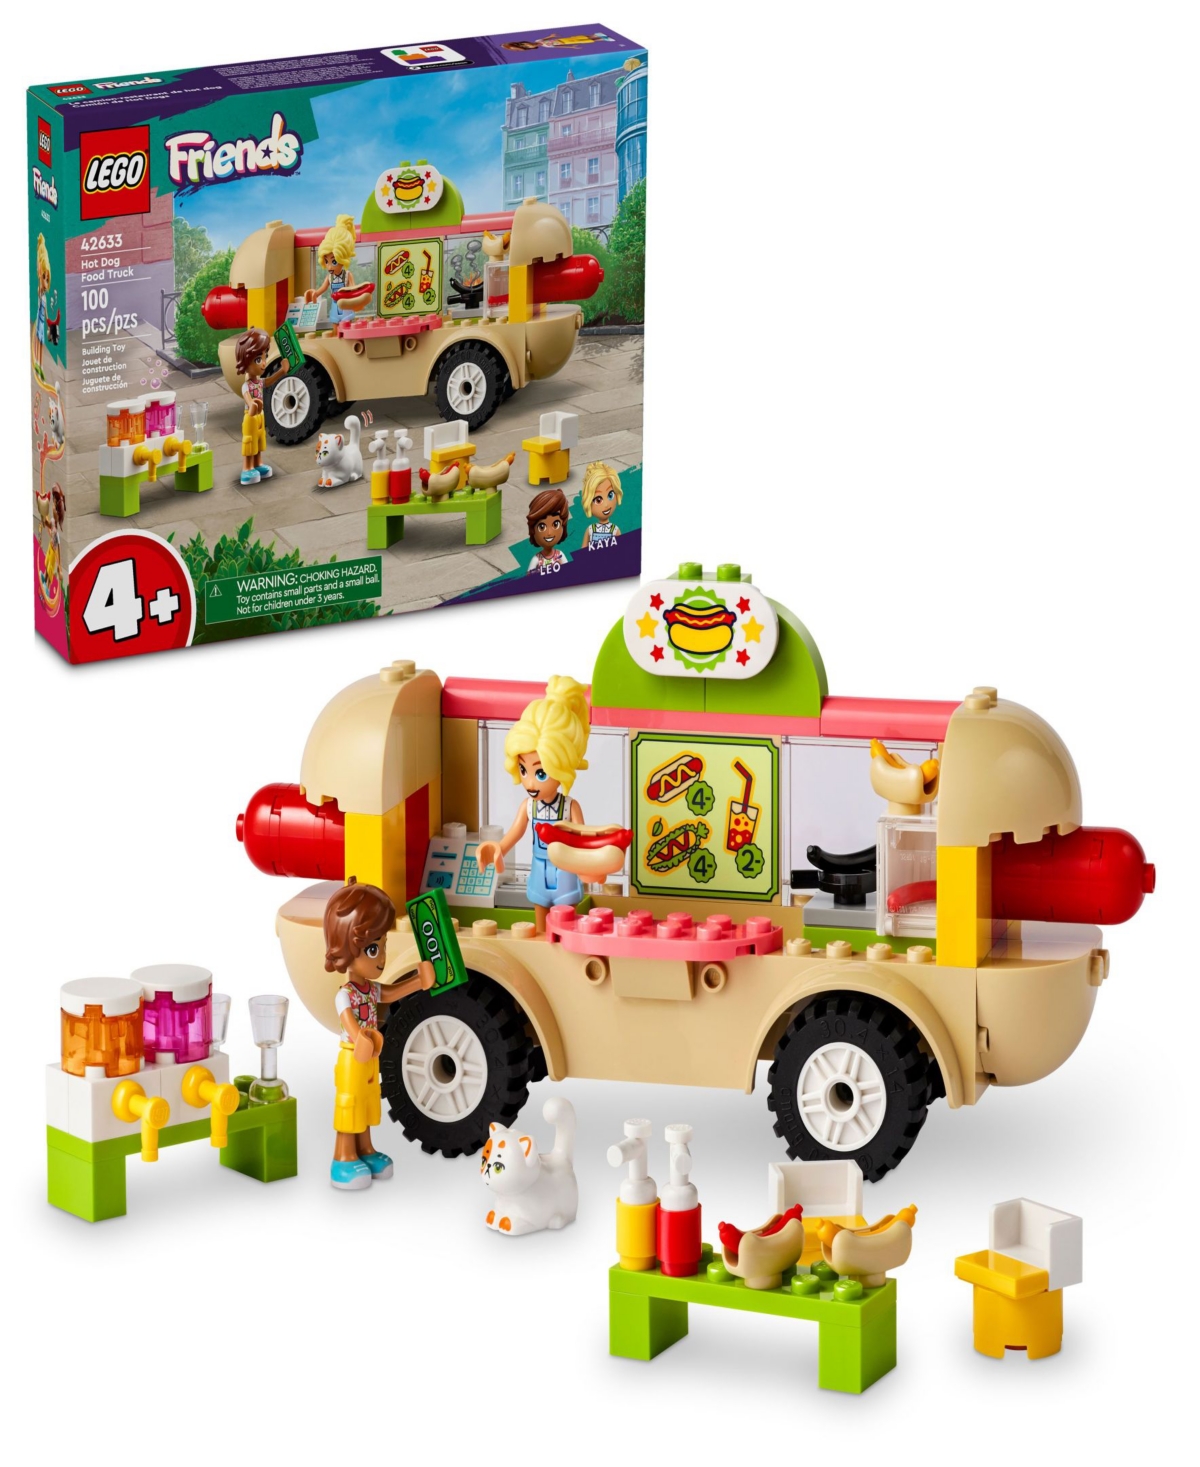 Lego Friends Hot Dog Food Truck Toy 42633, 100 Pieces In Multicolor